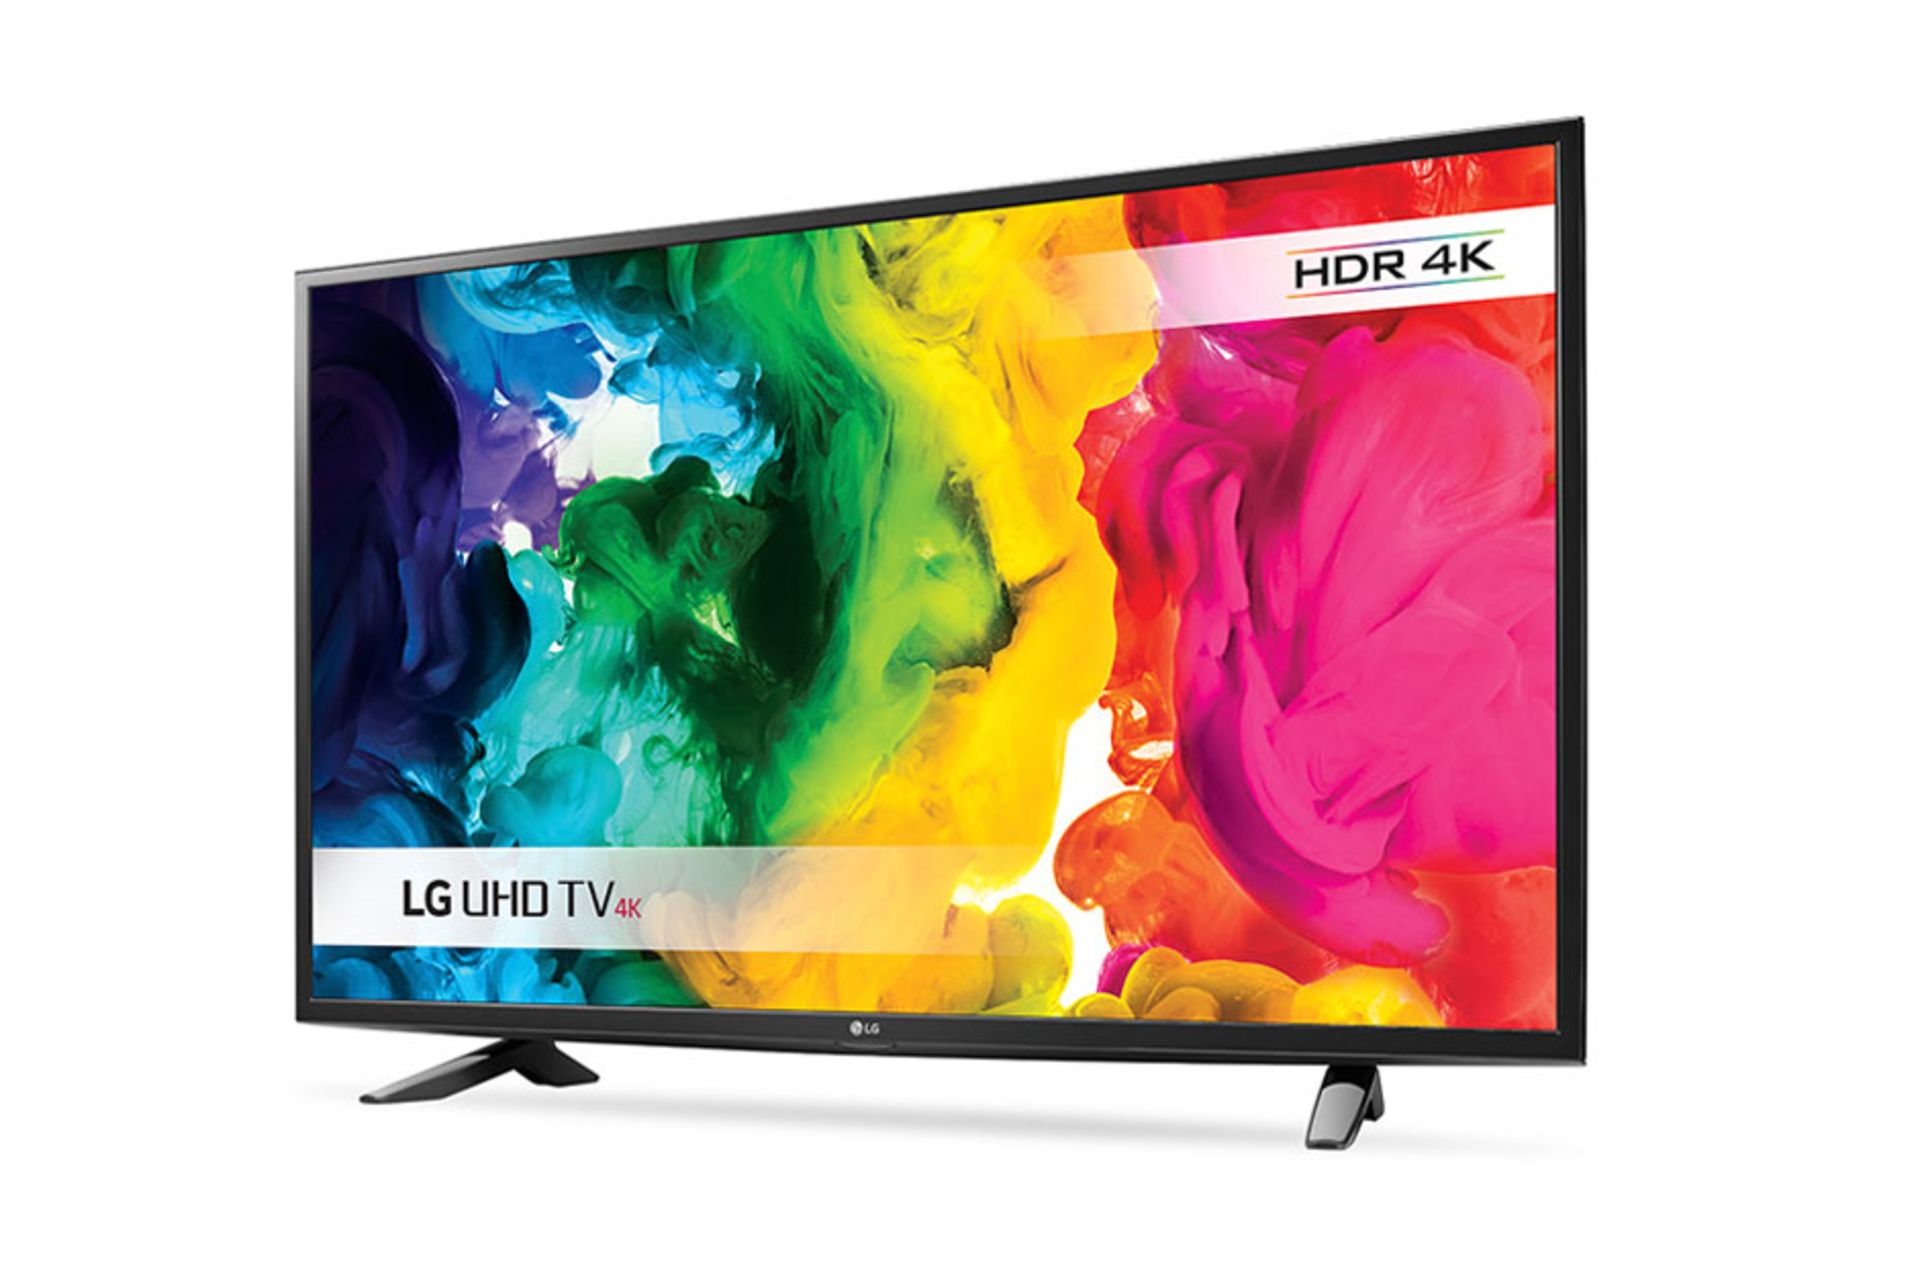 V Grade A LG 43" HDR Pro 4K Ultra HD Smart TV - WebOS - Ultra Surround - 3D Colour Mapping - WiFi